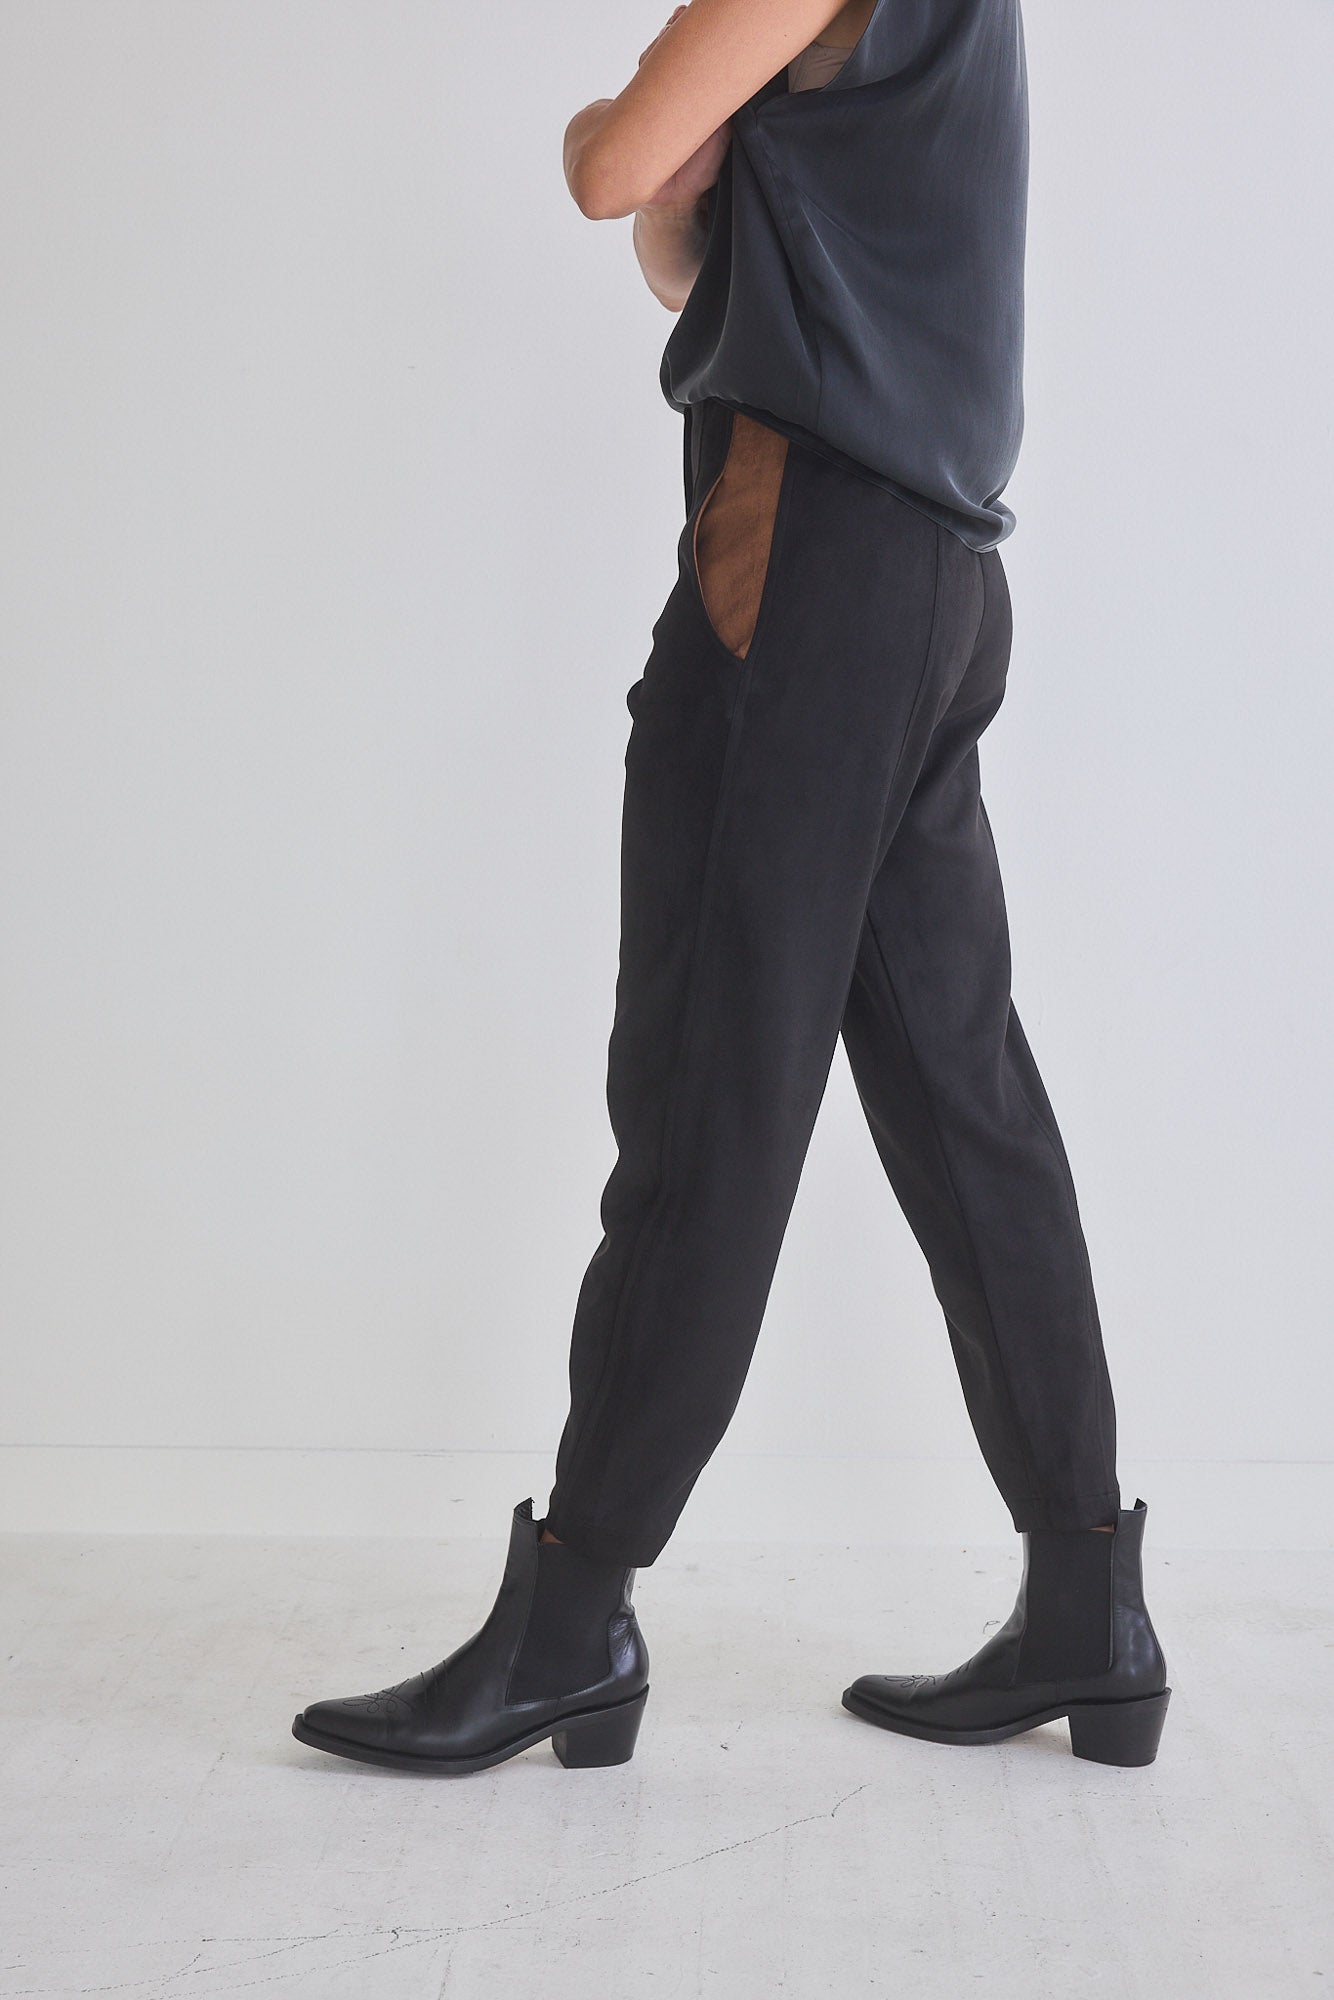 Not Too Tapered Microsuede Pants